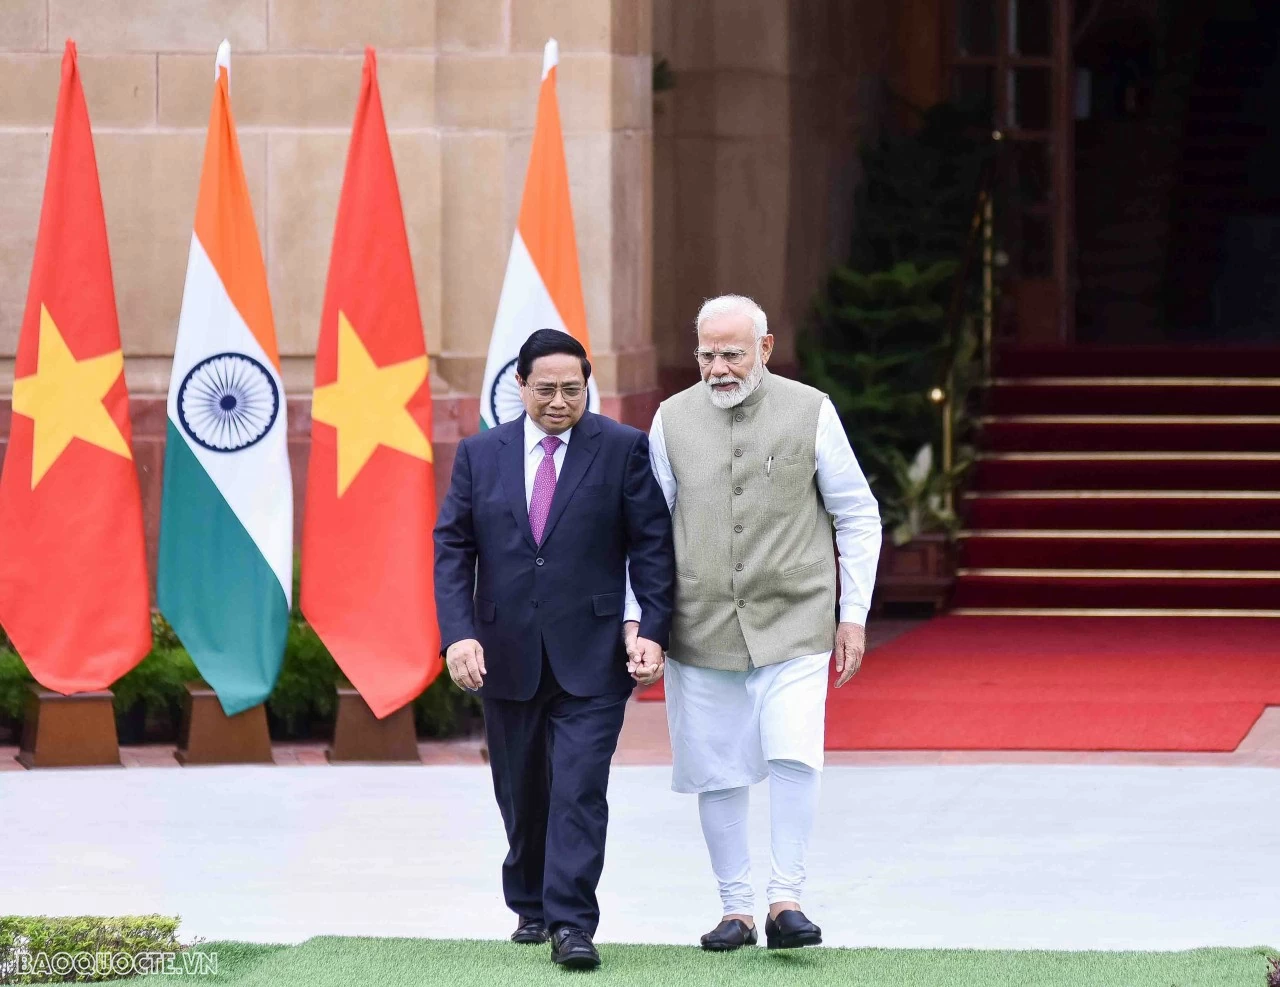 Prime Minister Pham Minh Chinh successfully concludes State visit to India